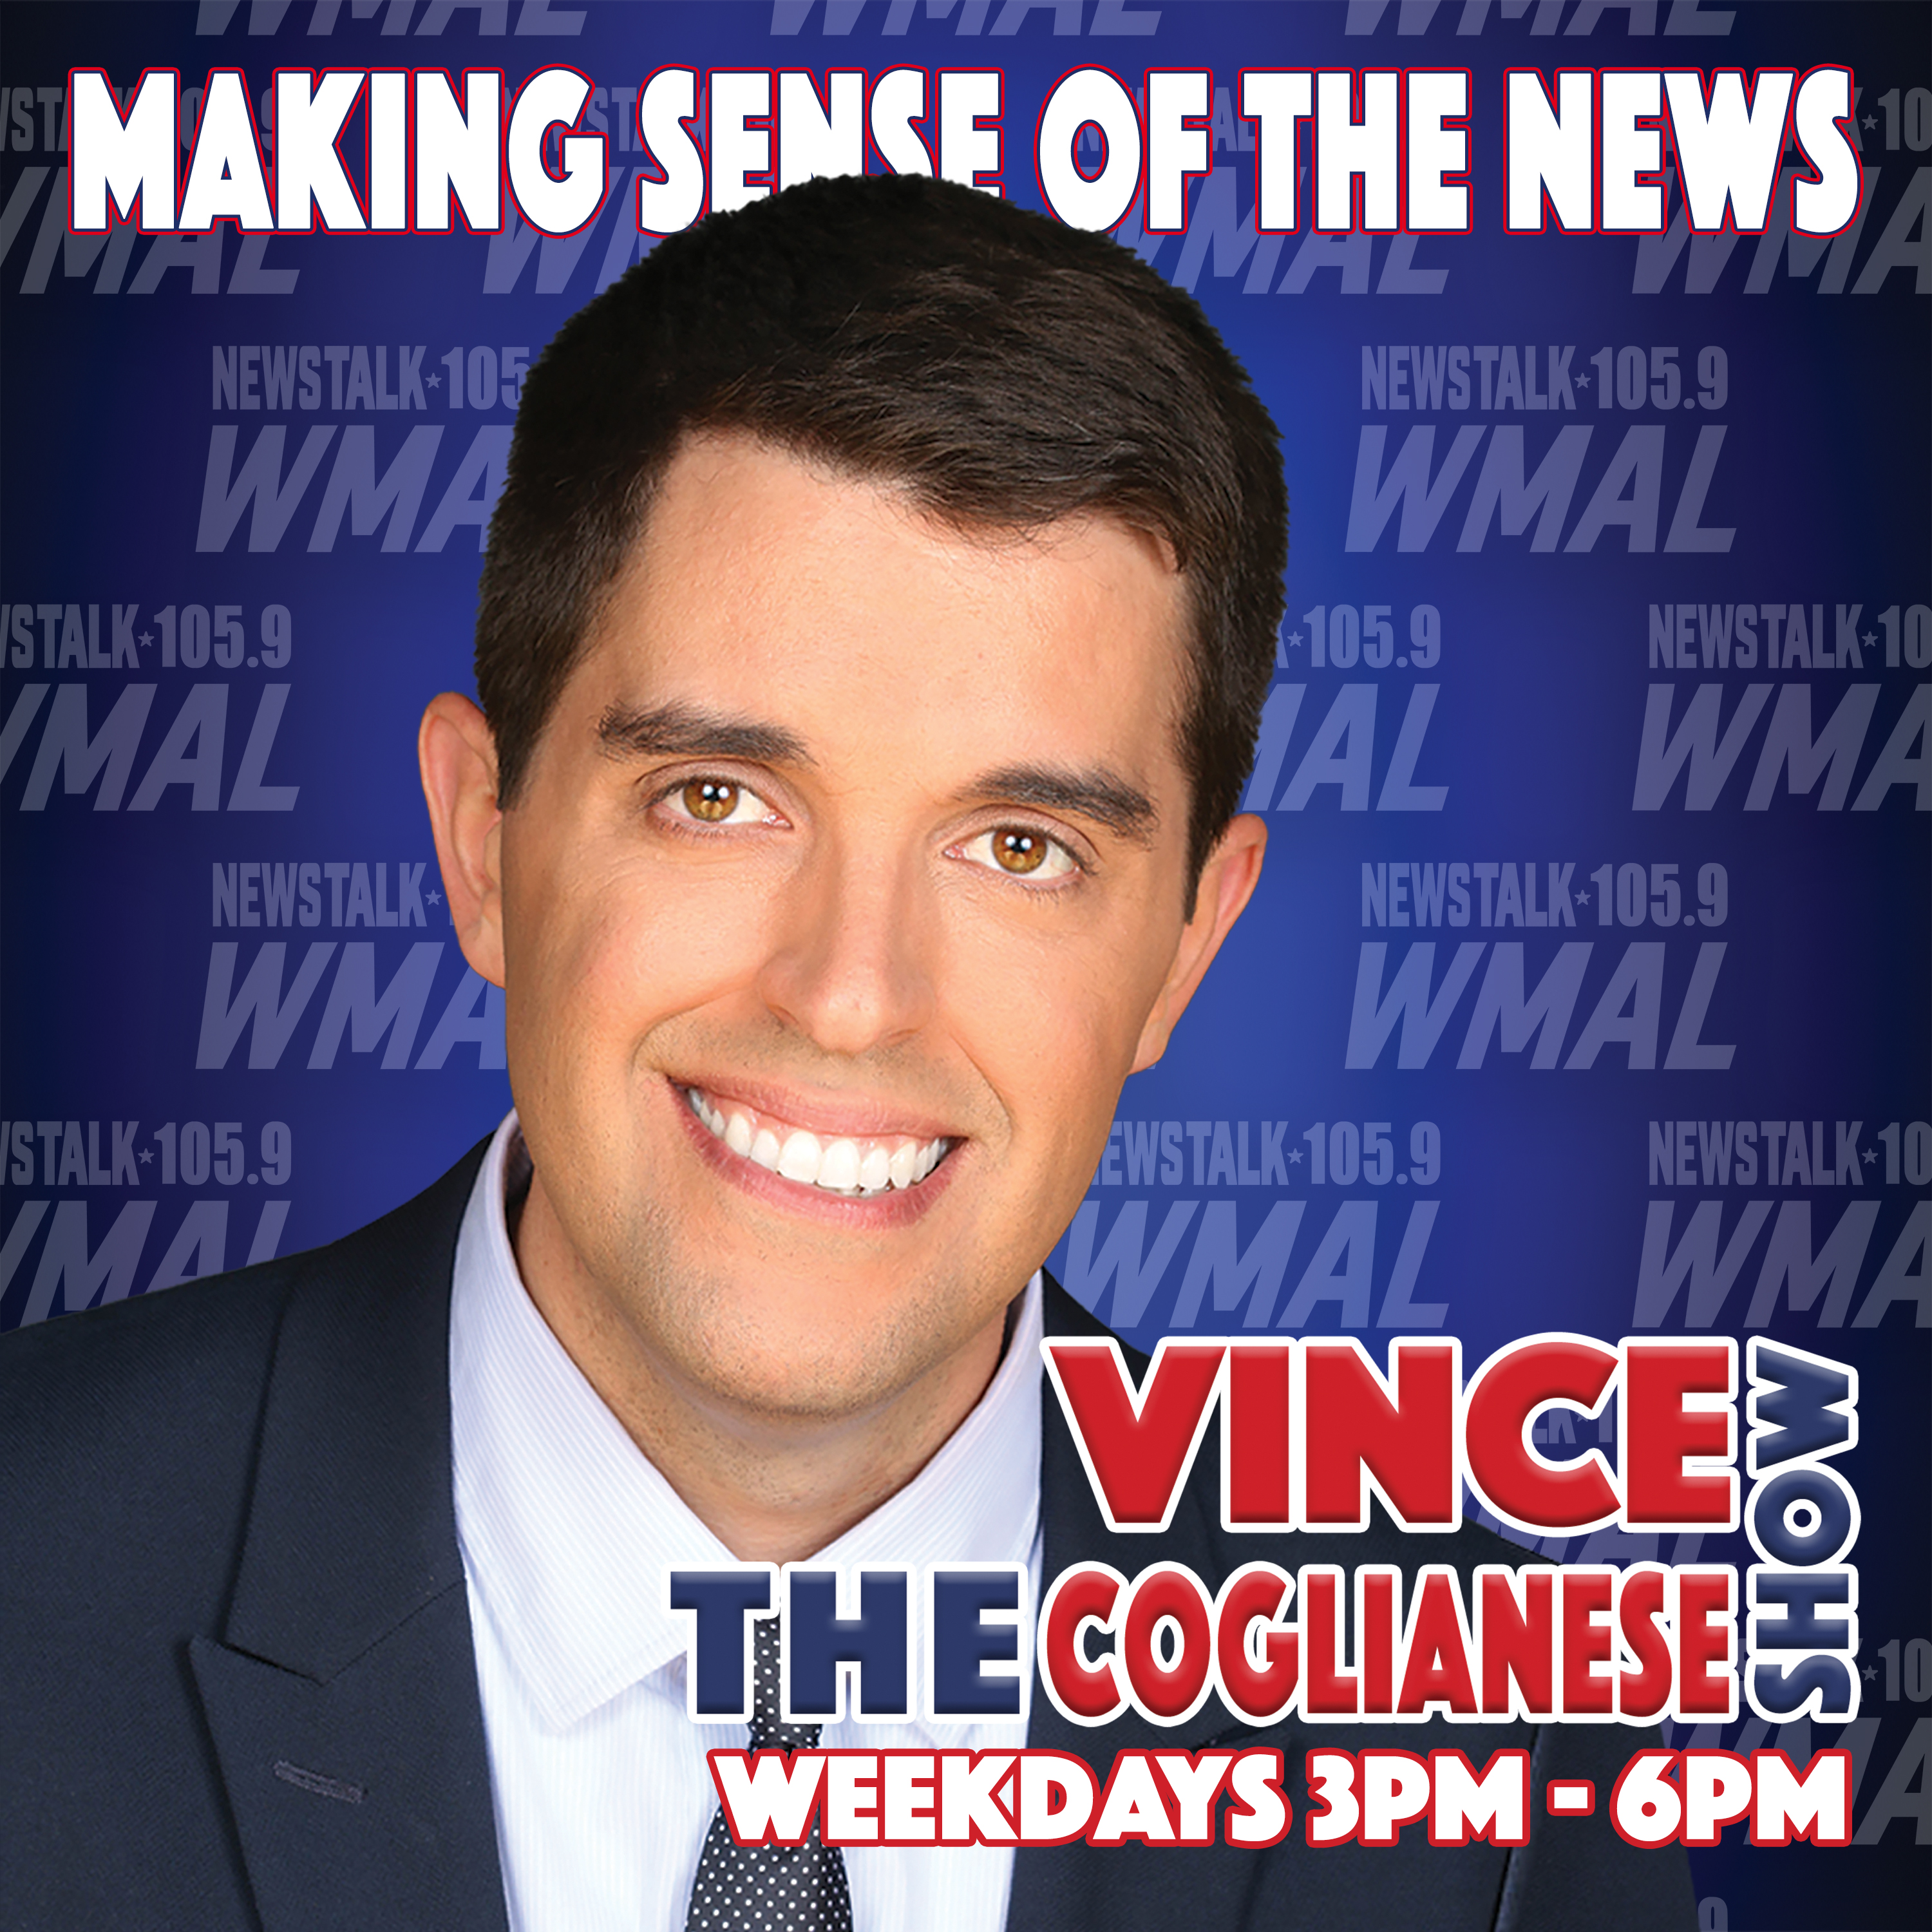 The Vince Coglianese Show - Tammy Bruce - 09.13.21